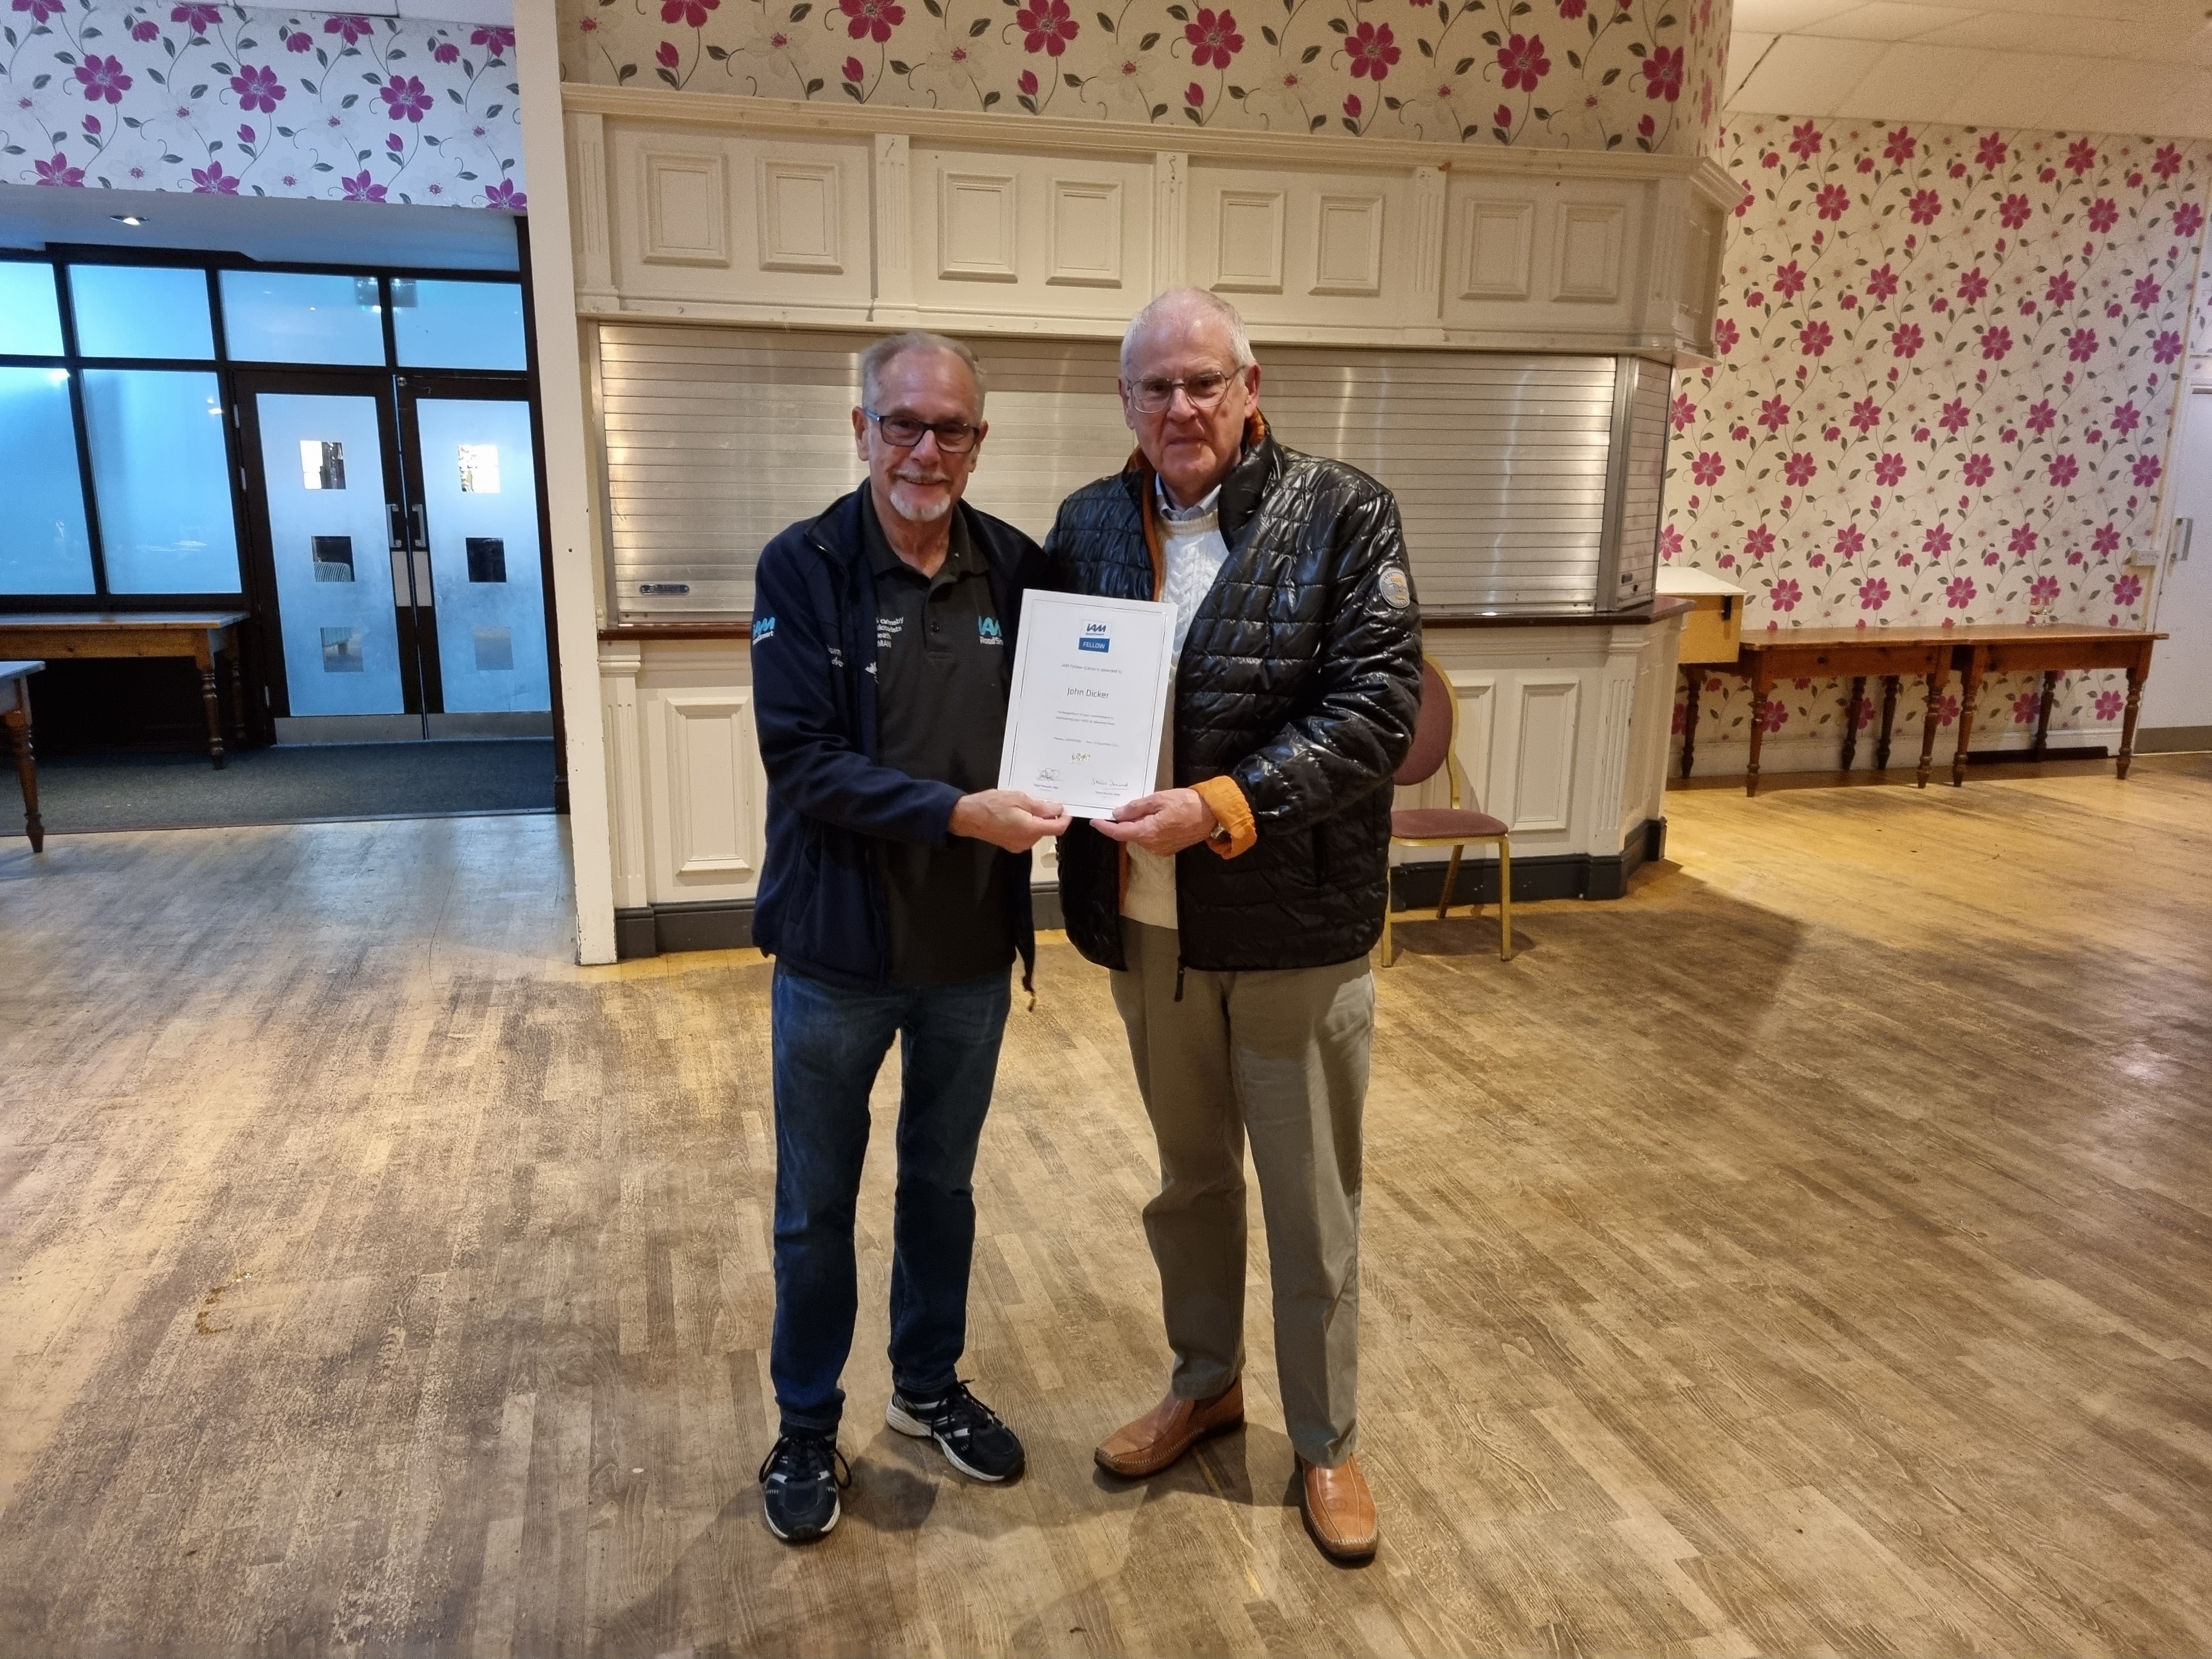 Terry heath presented John Dicker with his certificate for passing his fellows Advanced driving test with a first category